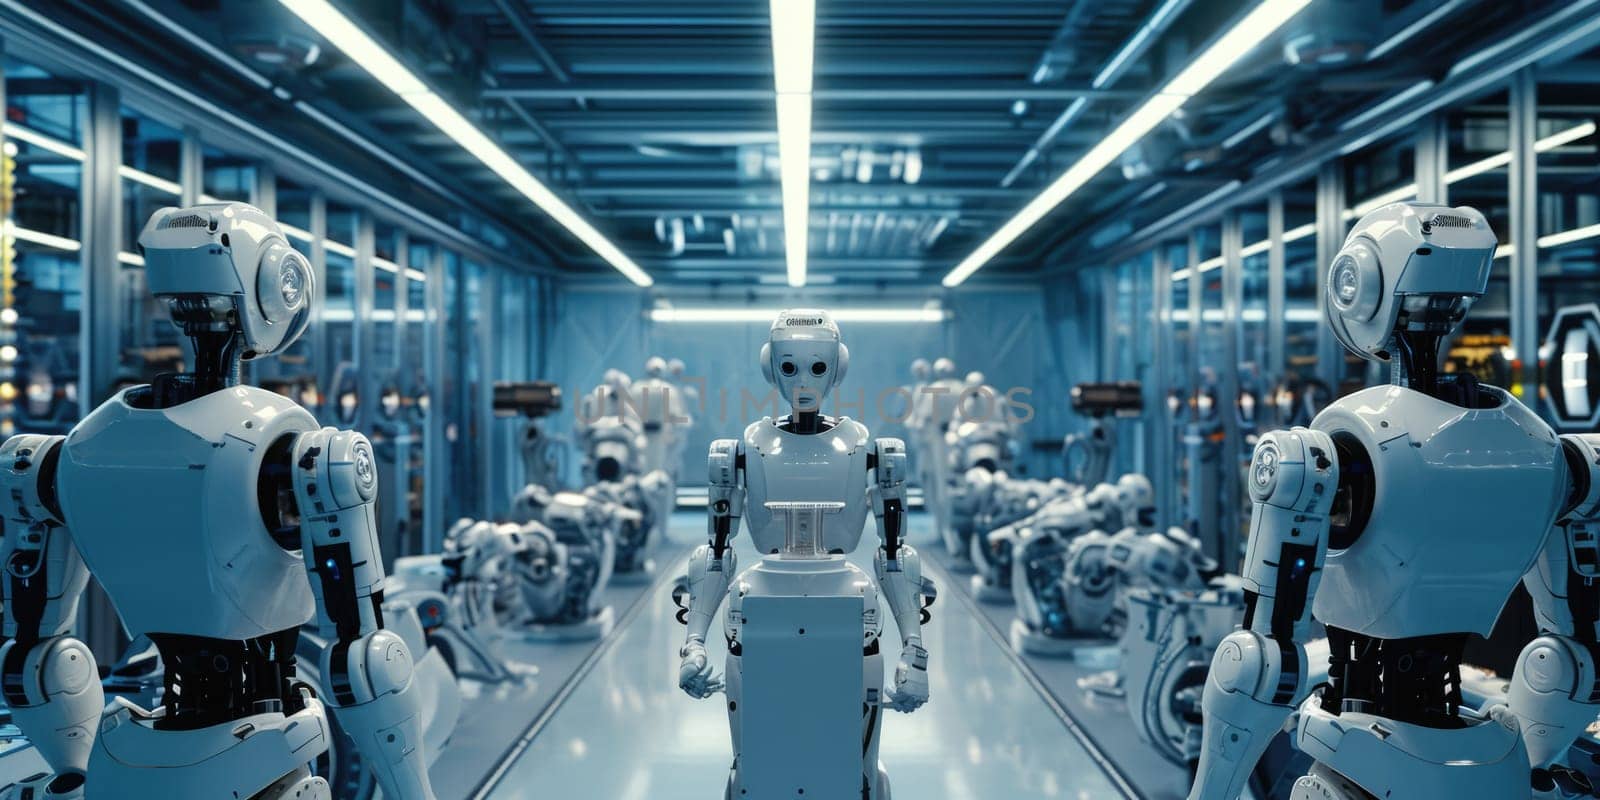 A high-tech robotics lab, engineers working on advanced AI machines, showcasing innovation and futuristic technology. Resplendent.